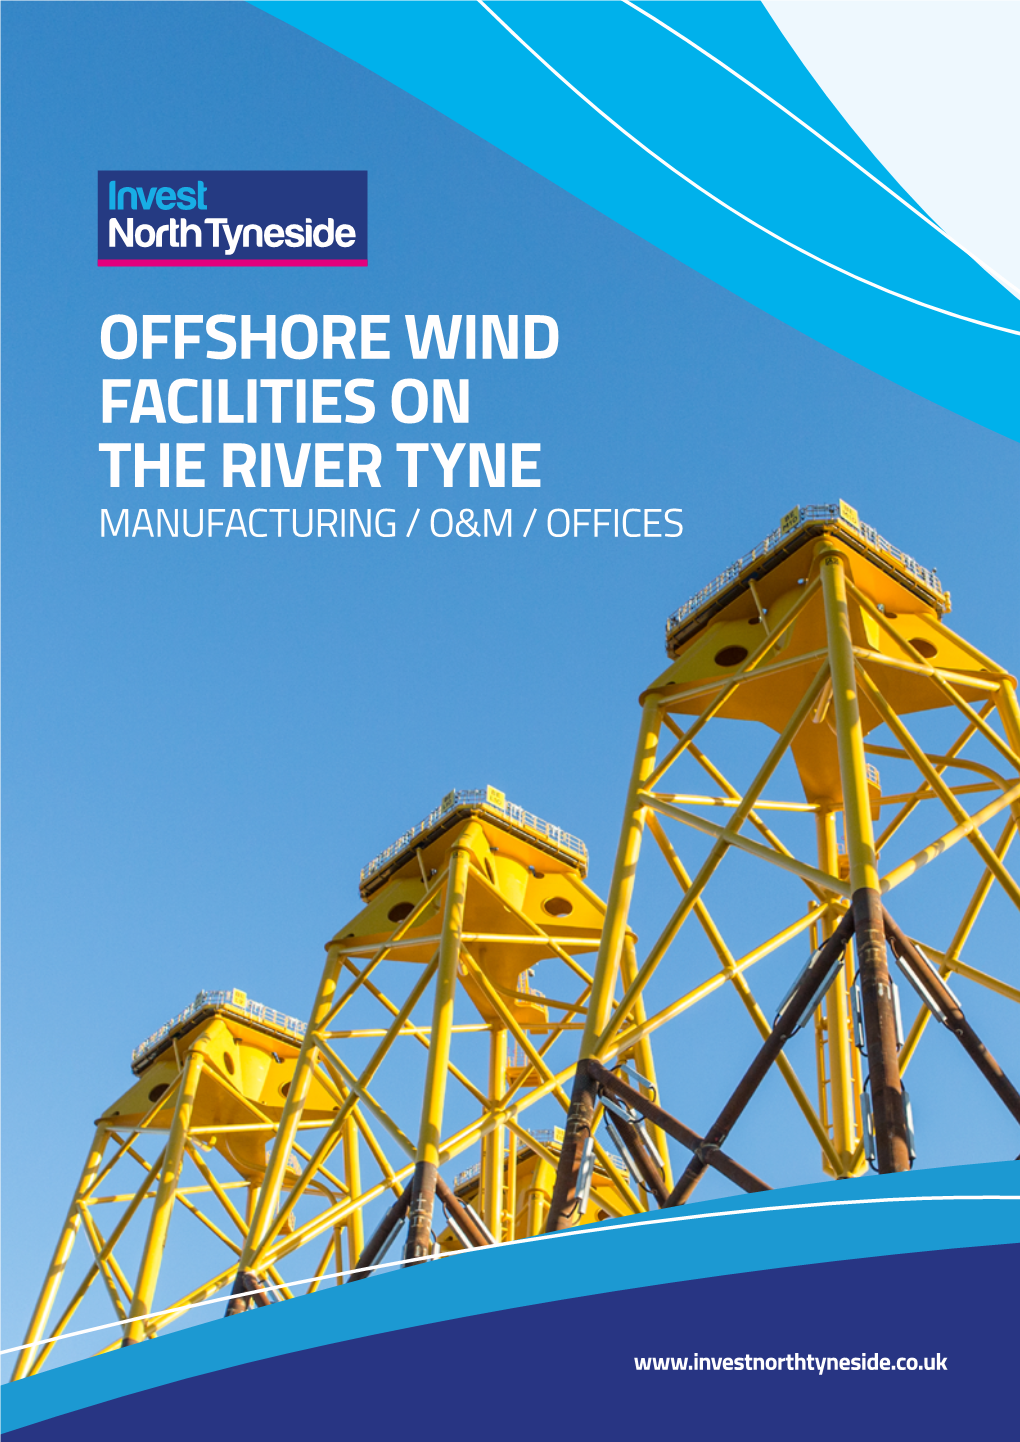 Offshore Wind Facilities on the River Tyne Manufacturing / O&M / Offices